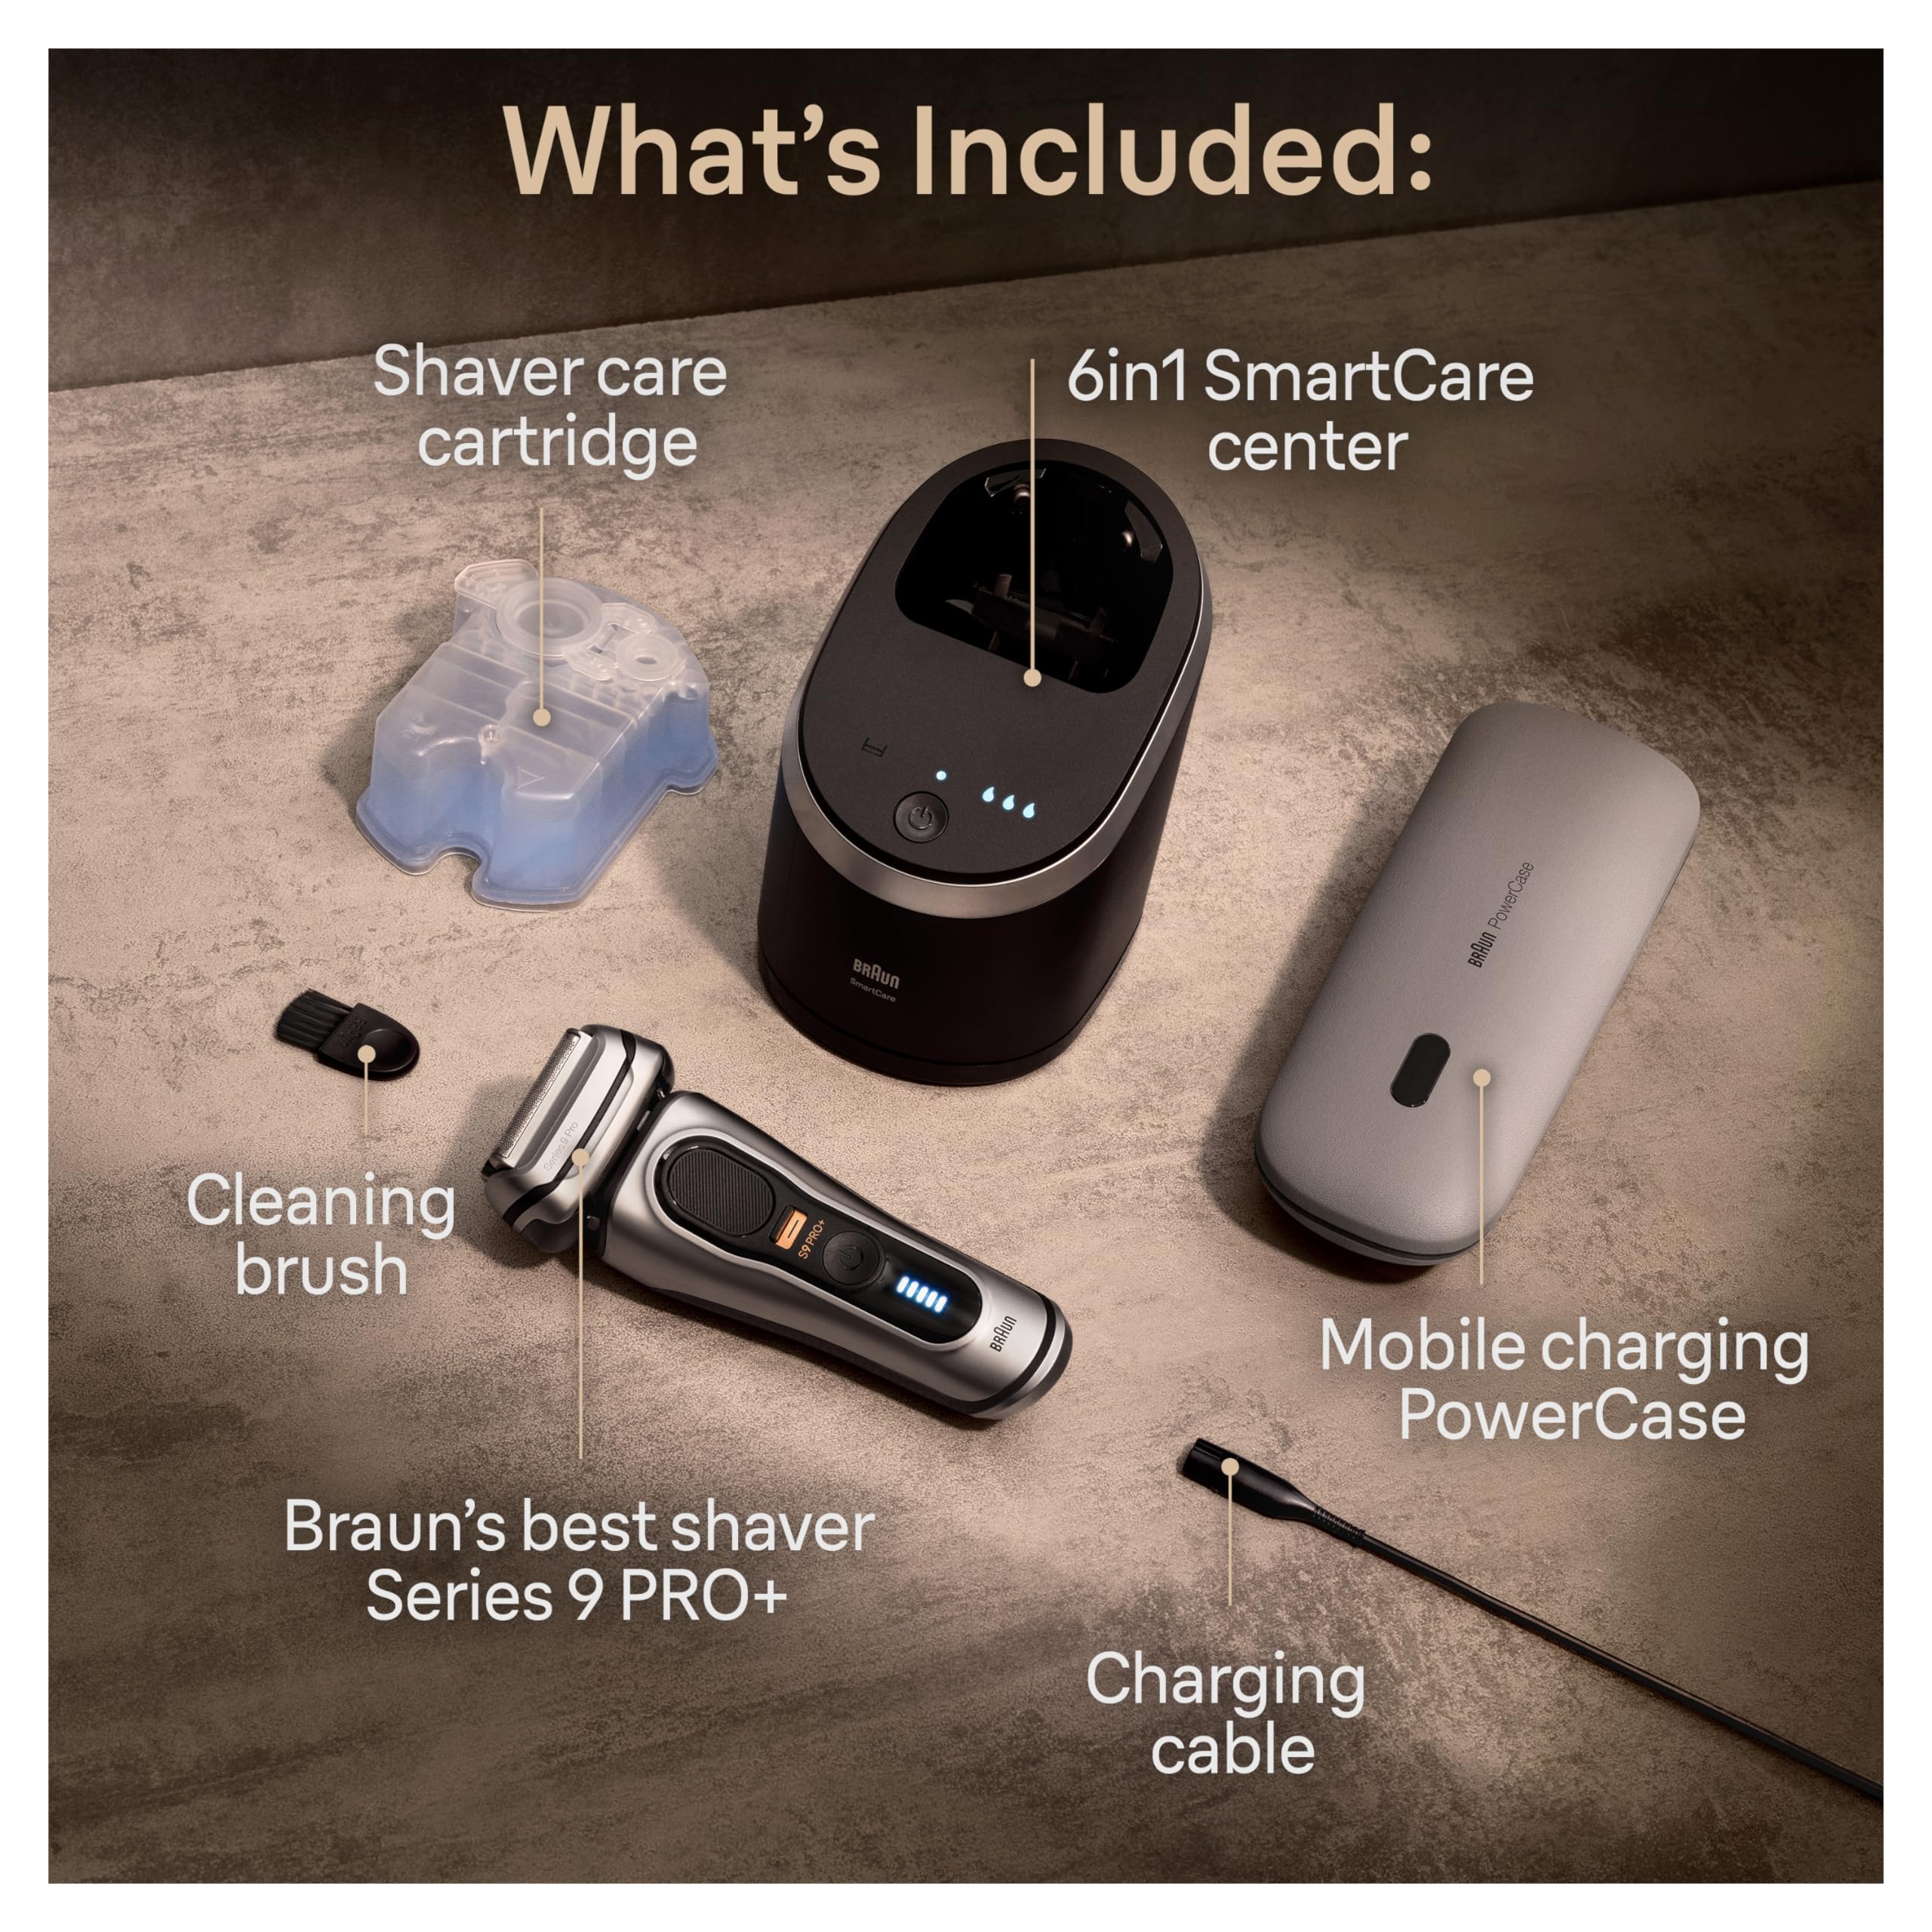 Braun Series 9 PRO+ Electric Razor for Men, 5 Pro Shave Elements & Precision Long Hair Trimmer, 6in1 SmartCare Center, PowerCase for Mobile Charging, Wet & Dry Electric Razor, 60min Battery Runtime